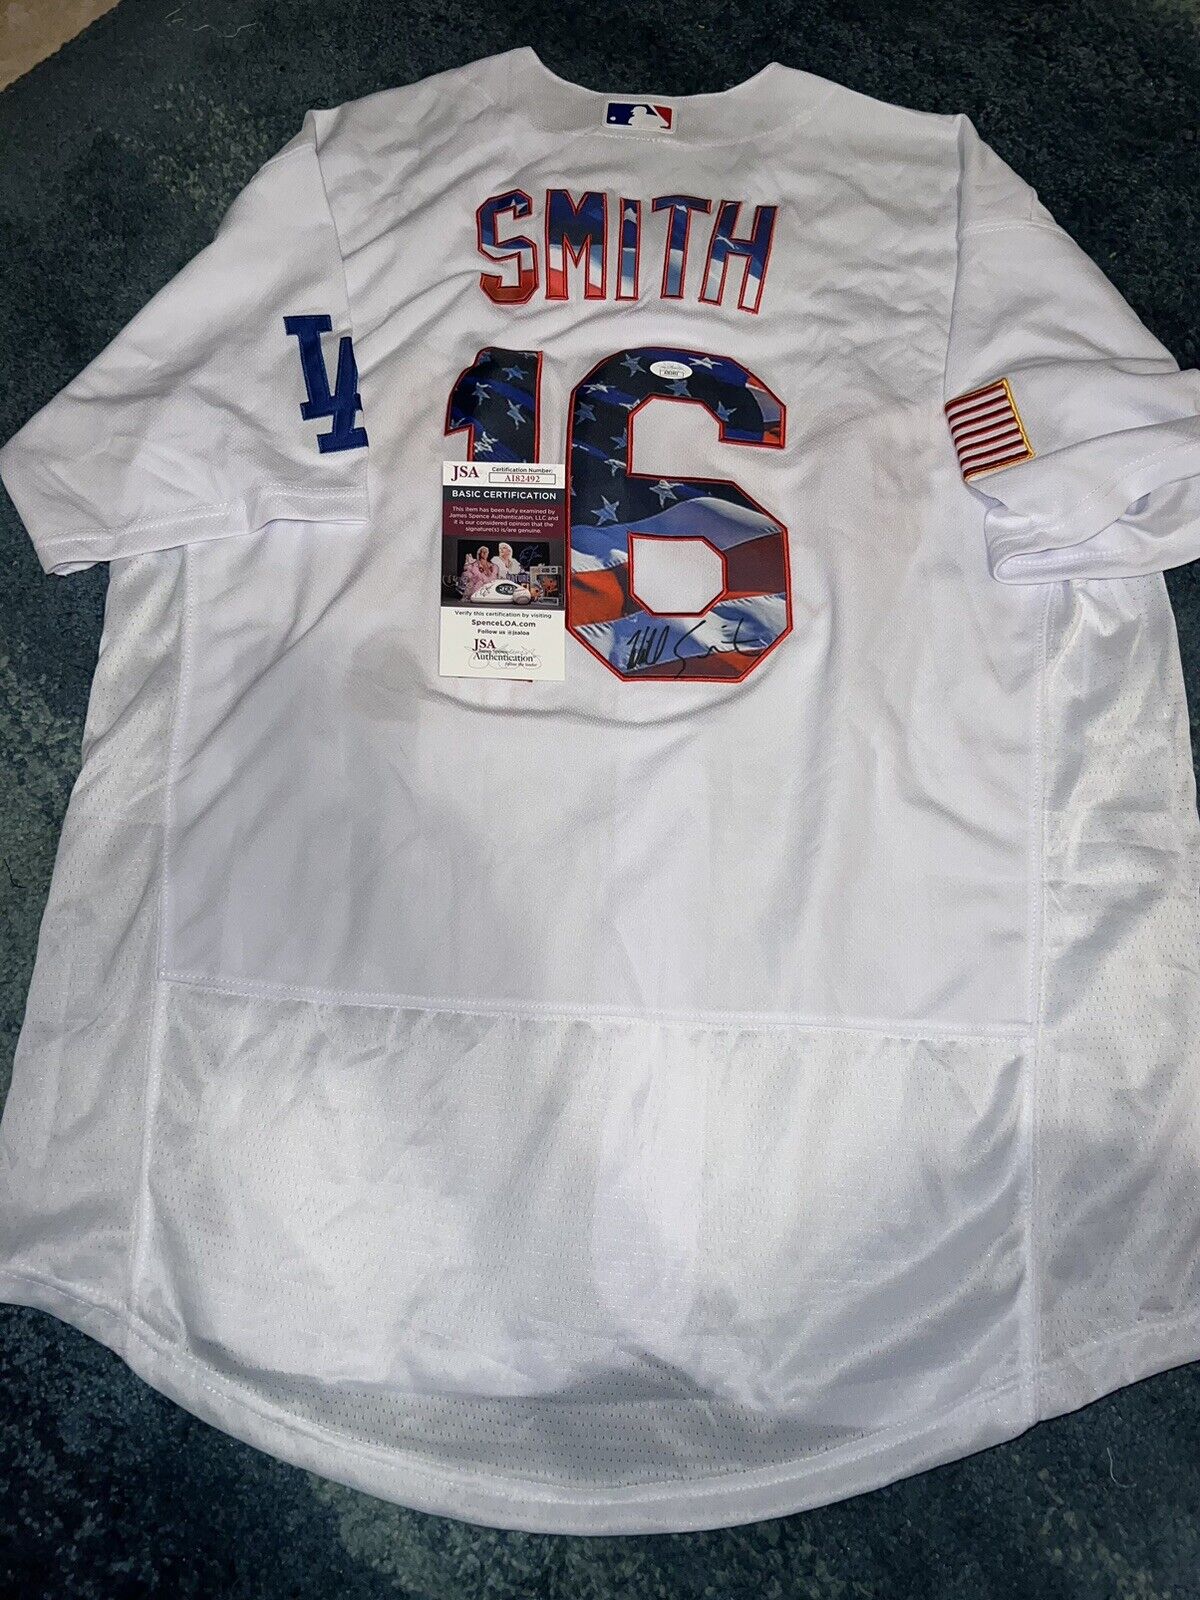 dodgers will smith jersey